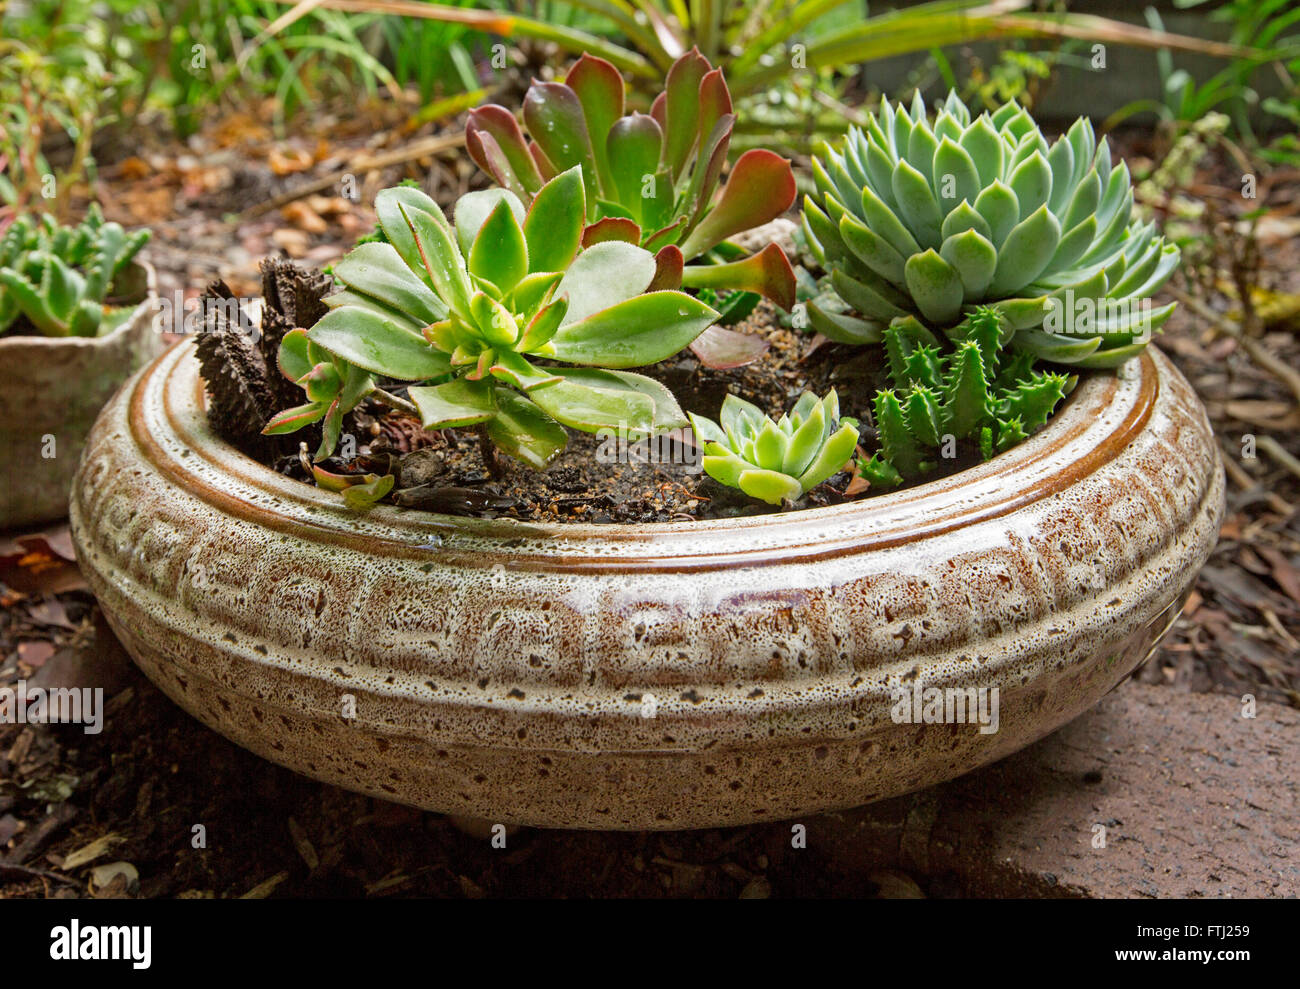 Group of succulent plants with blue green foliage growing in shallow circular decorative brown and white ceramic container Stock Photo